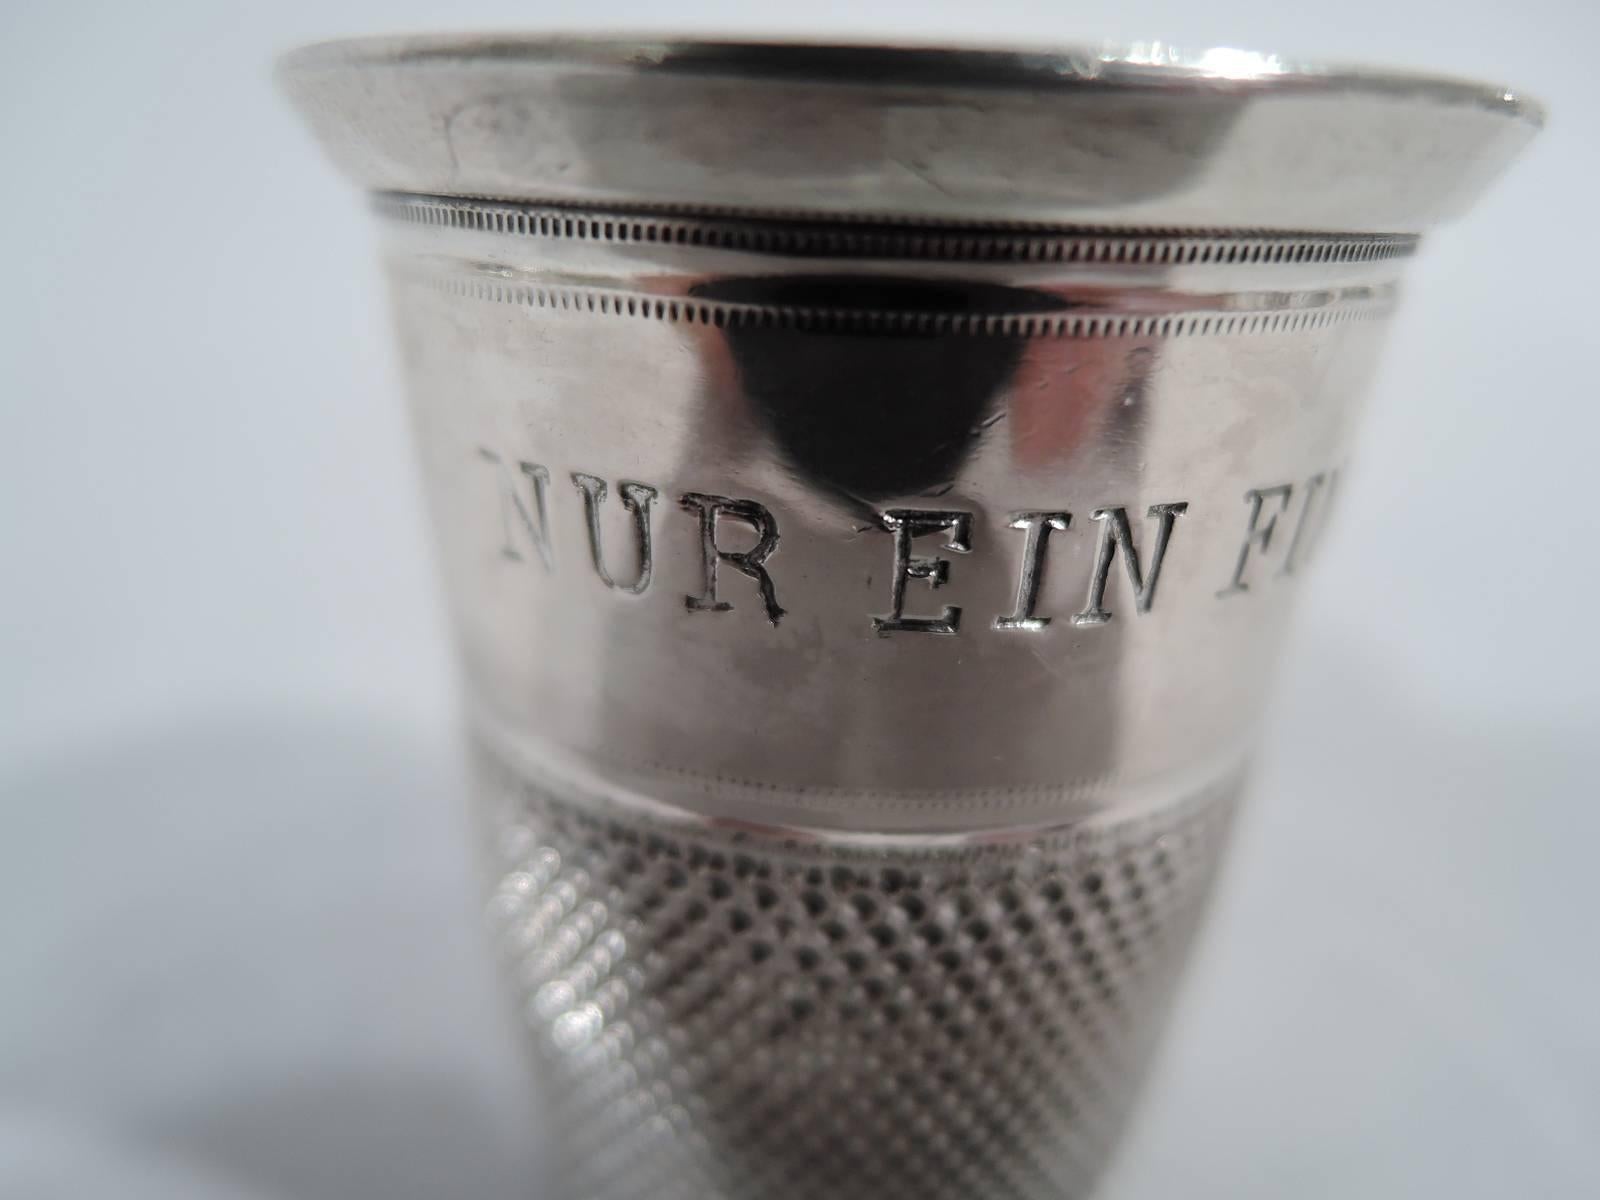 Antique German 835 silver novelty shot glass. Honeycomb ground and plain band with the usual joke “Only a thimble full” in German (Nur ein Fingerhut voll). Hallmarked.